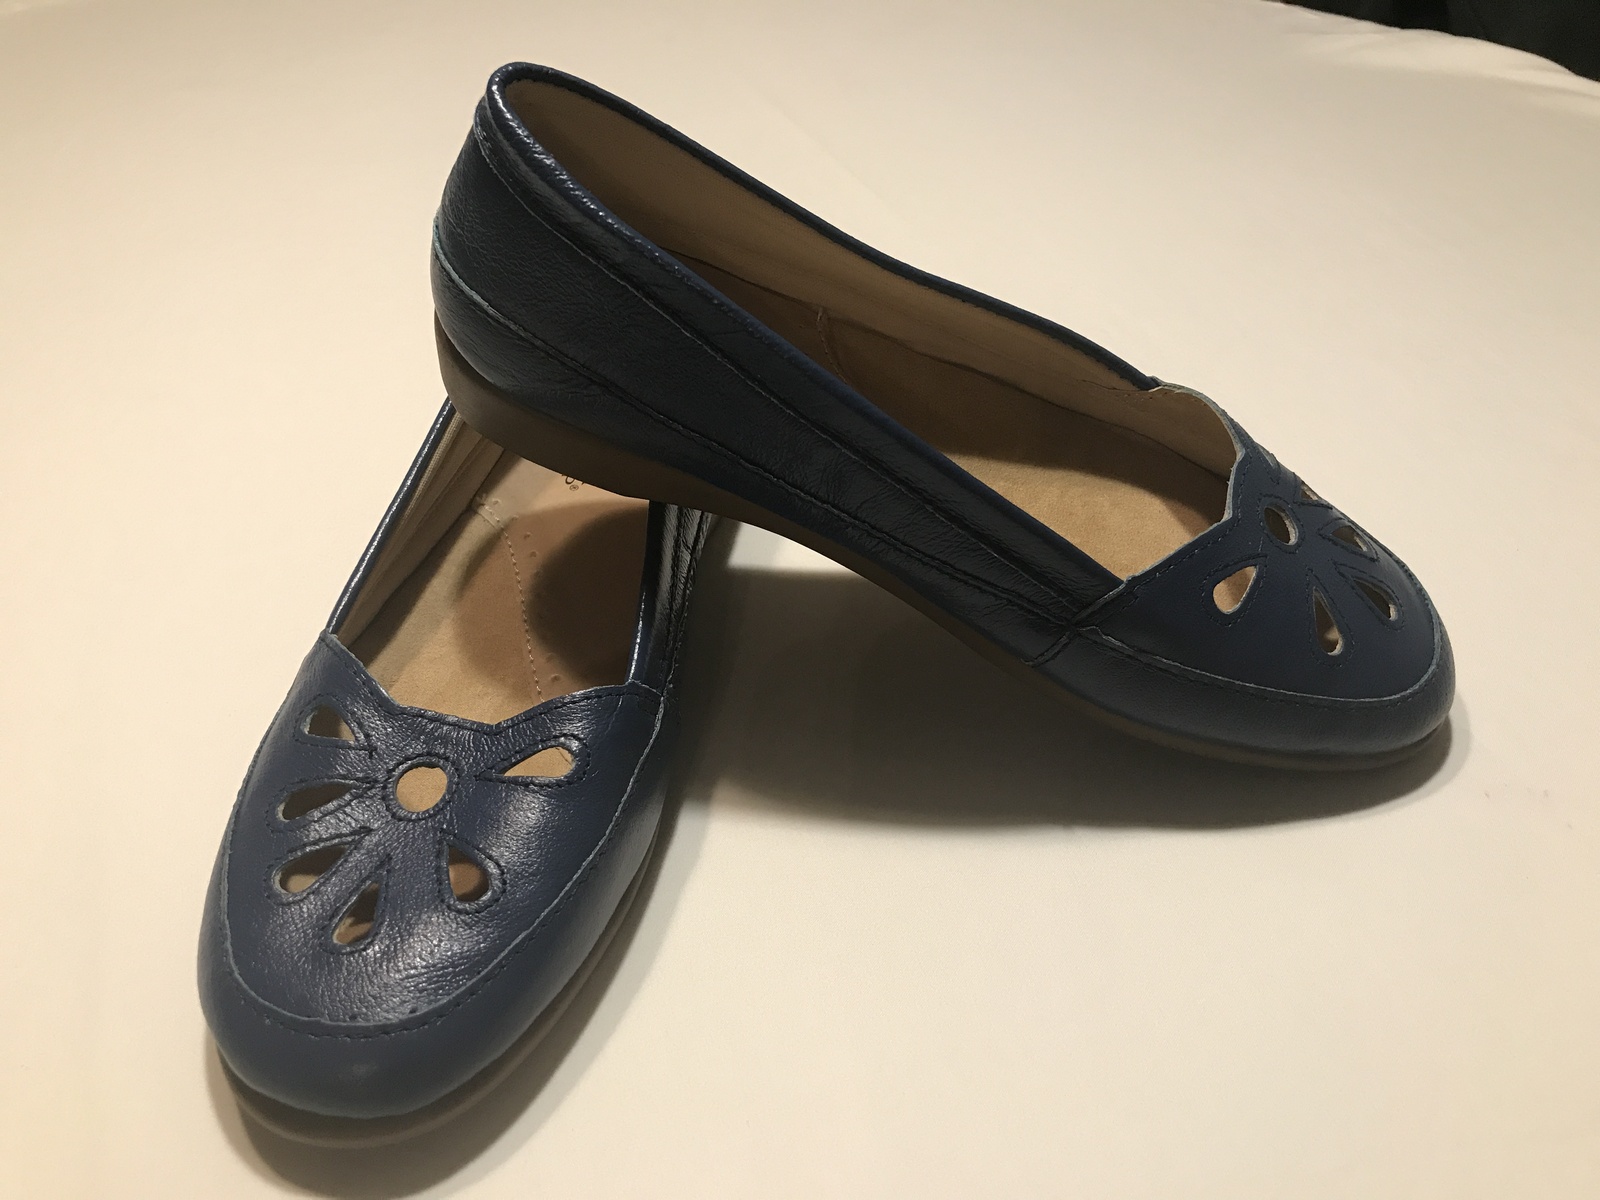 Women's Blue Shoes, Loafers, Size 8, The Tog Shop - Flats & Oxfords